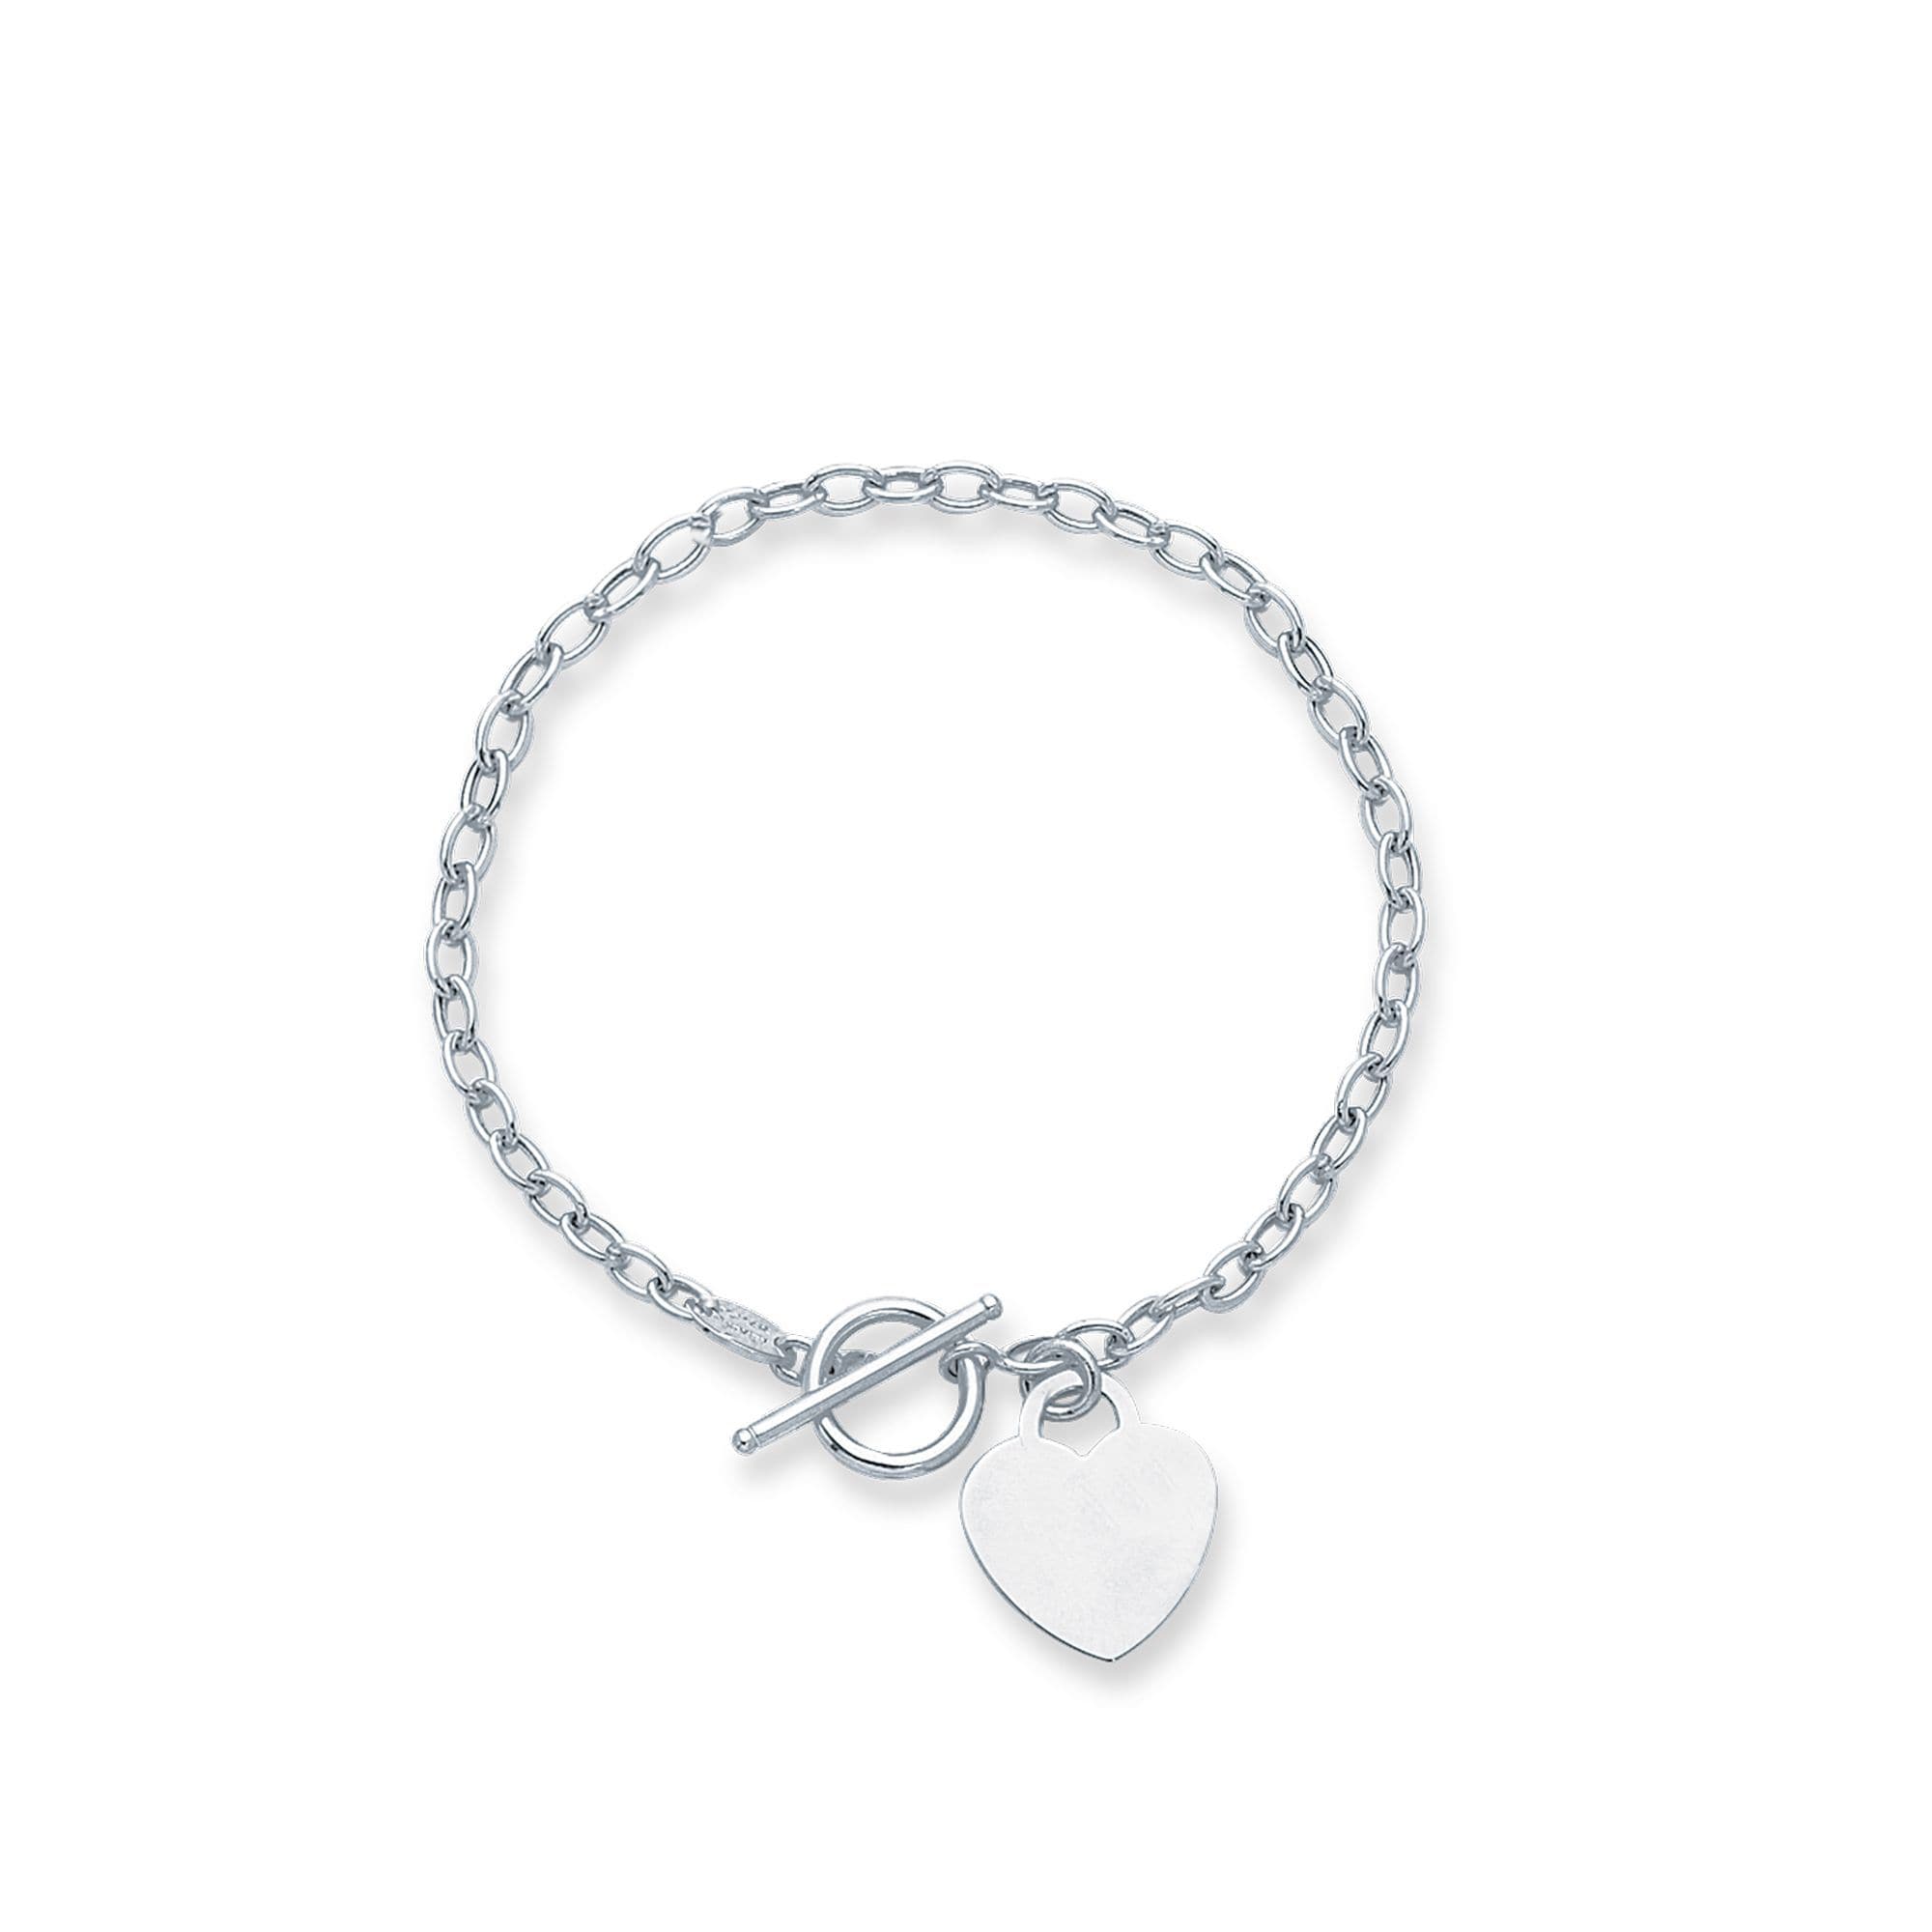 Oval Link Bracelet with Sterling Silver Heart Charms & Toggle Clasp